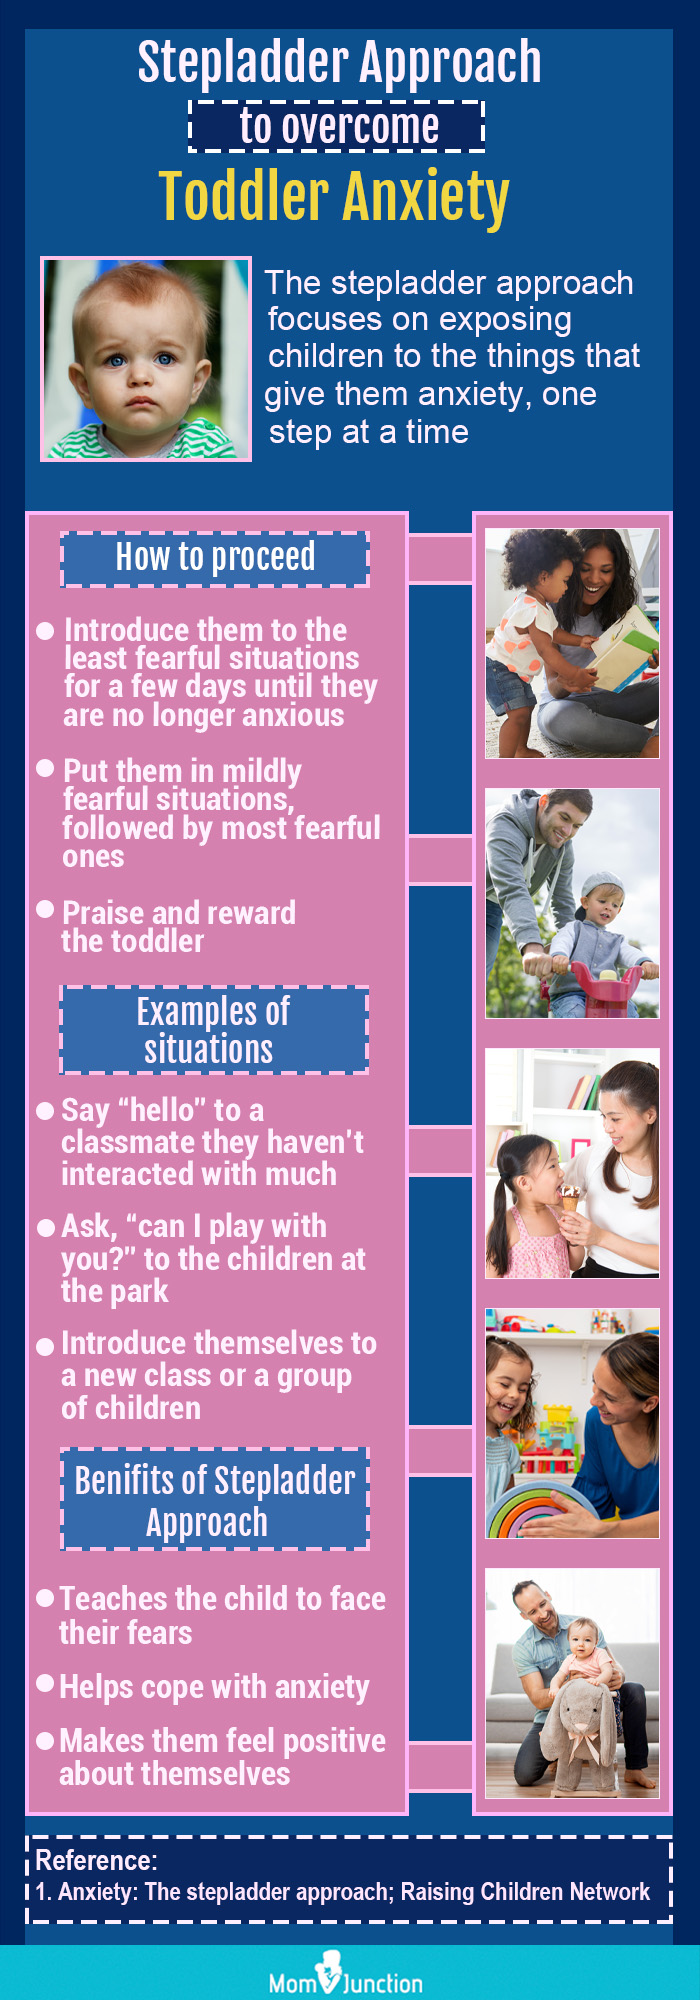 stepladder approach to overcome toddler anxiety [infographic]